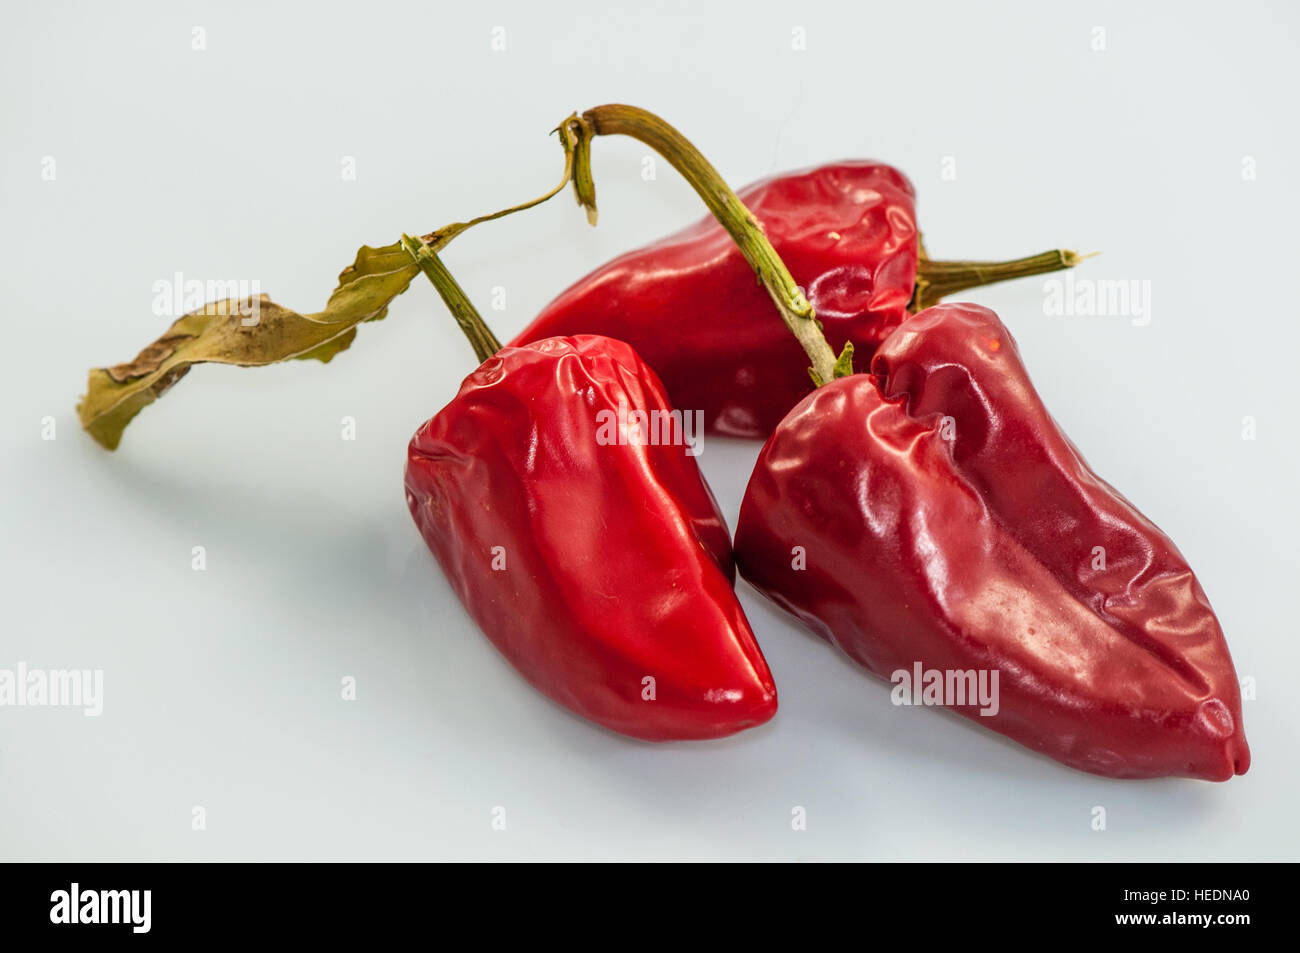 Red pepper overripe over a white background Stock Photo